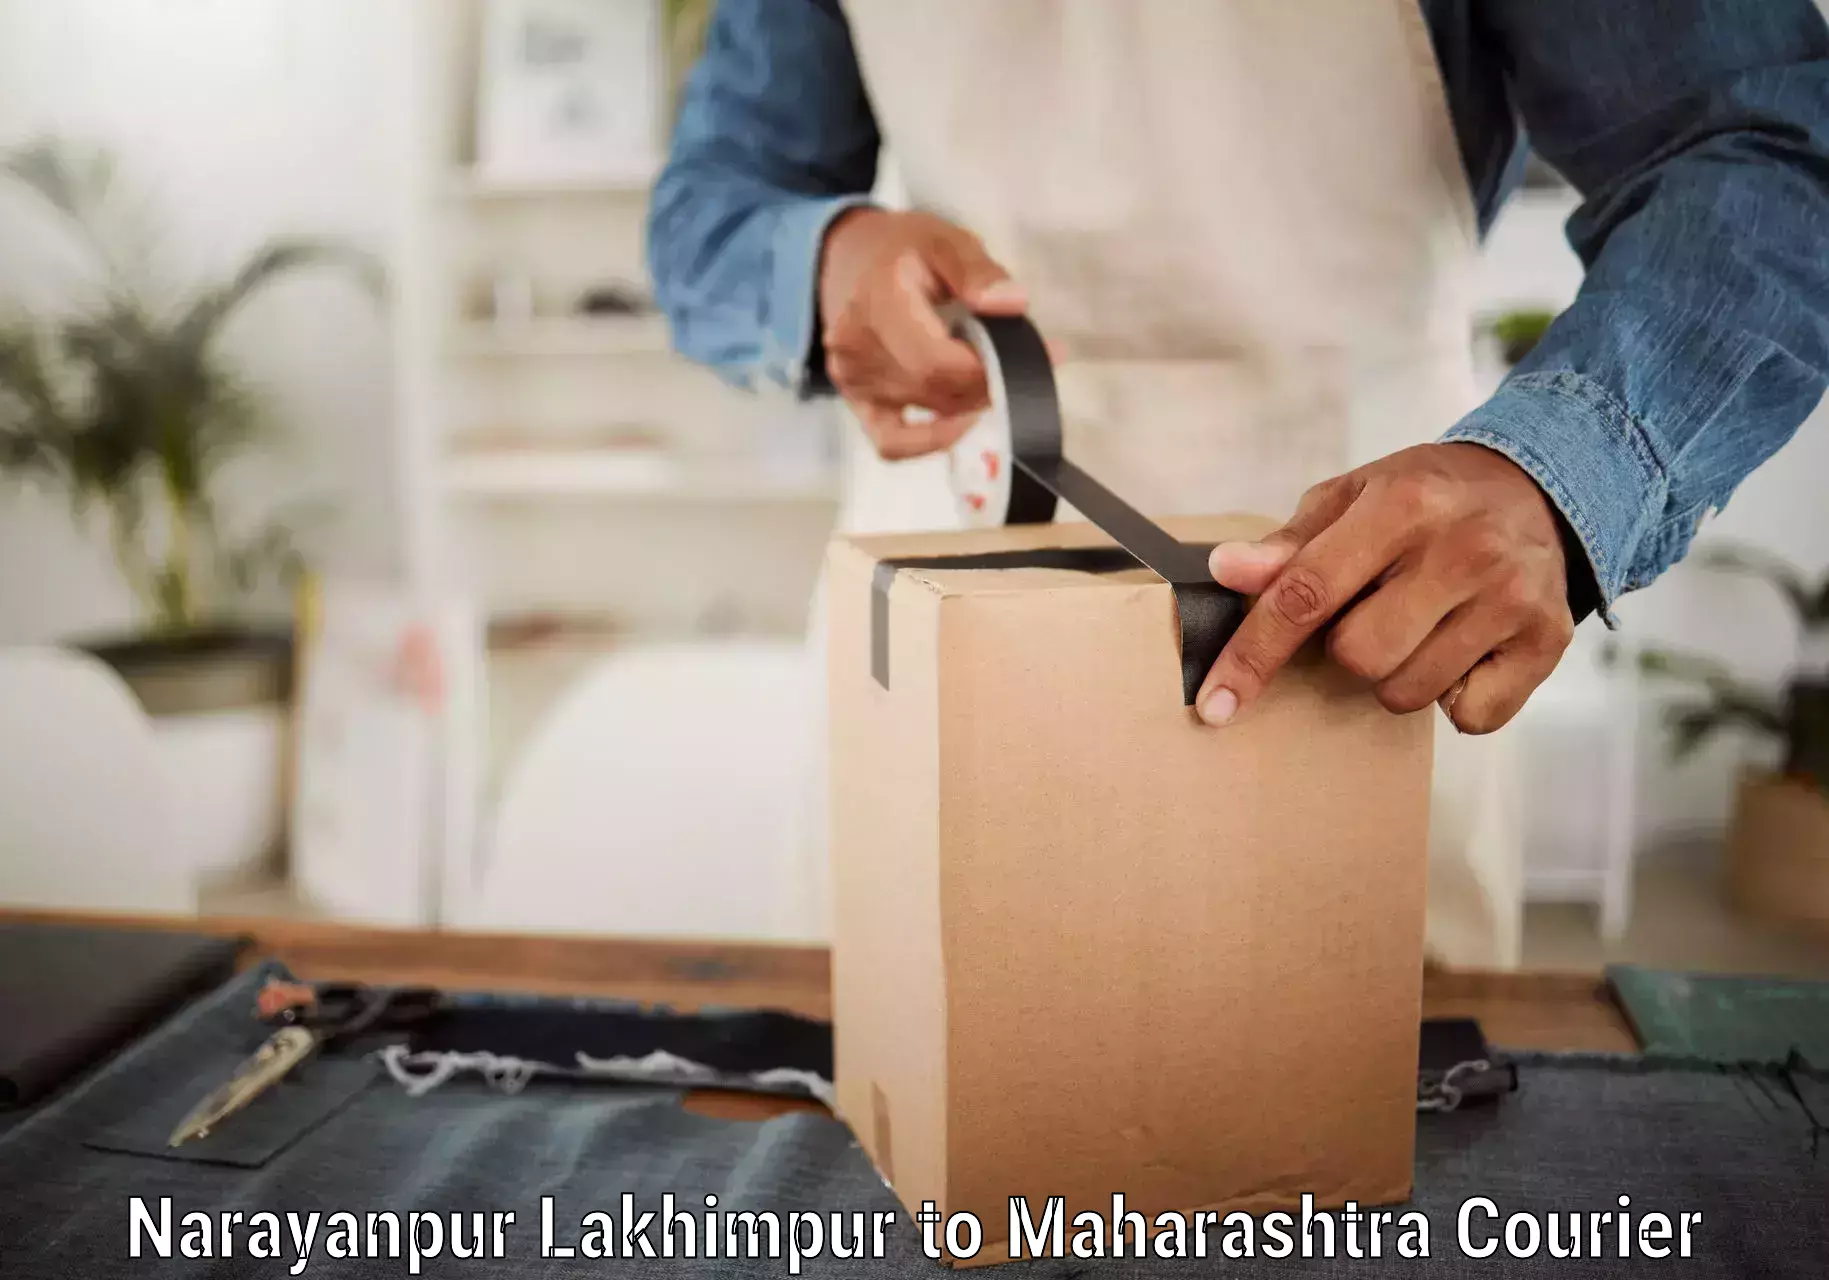 Reliable courier service in Narayanpur Lakhimpur to Dhule